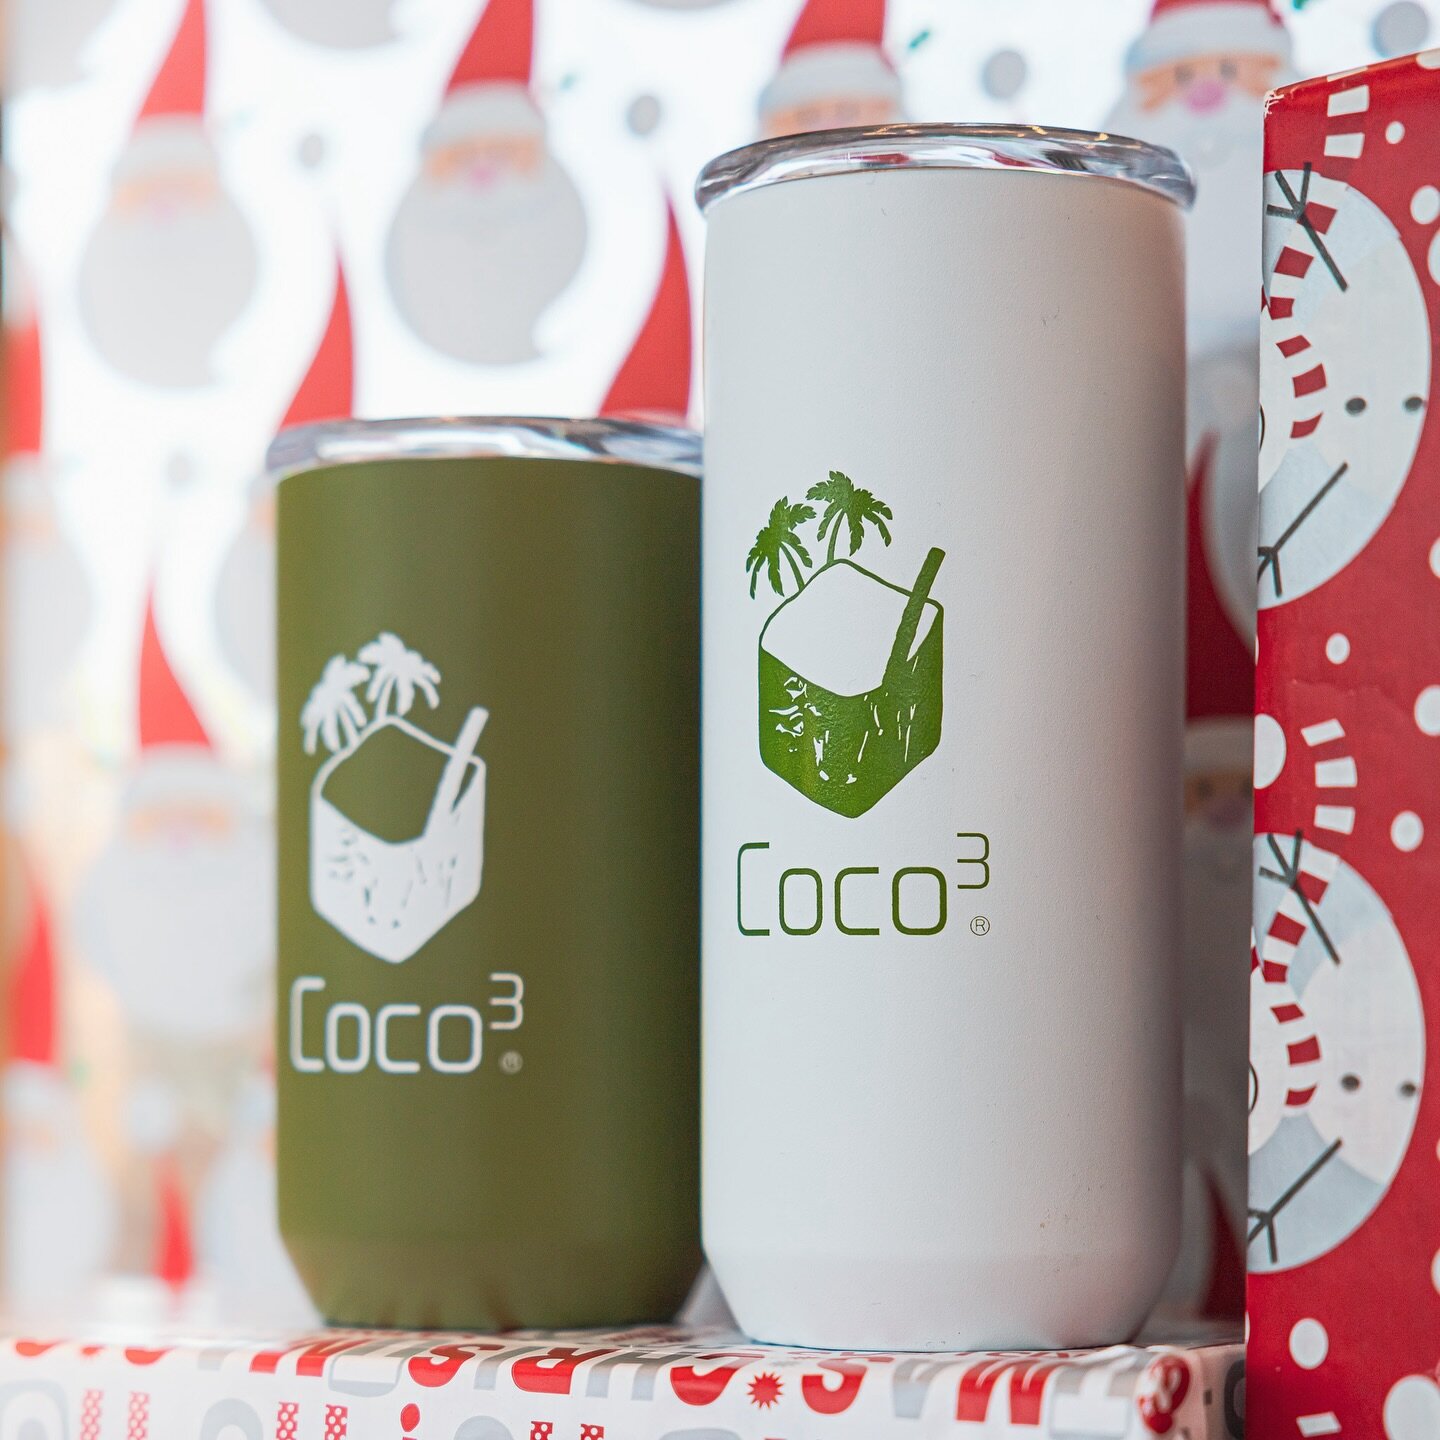 Merry Christmas!! 🎁🎄 need a last minute gift? stop by CocoCubed to purchase our tumbler cups as well as gift cards!!

Also, we are open from 10:30am - 4:00pm on 12/14 &amp; 12/25.